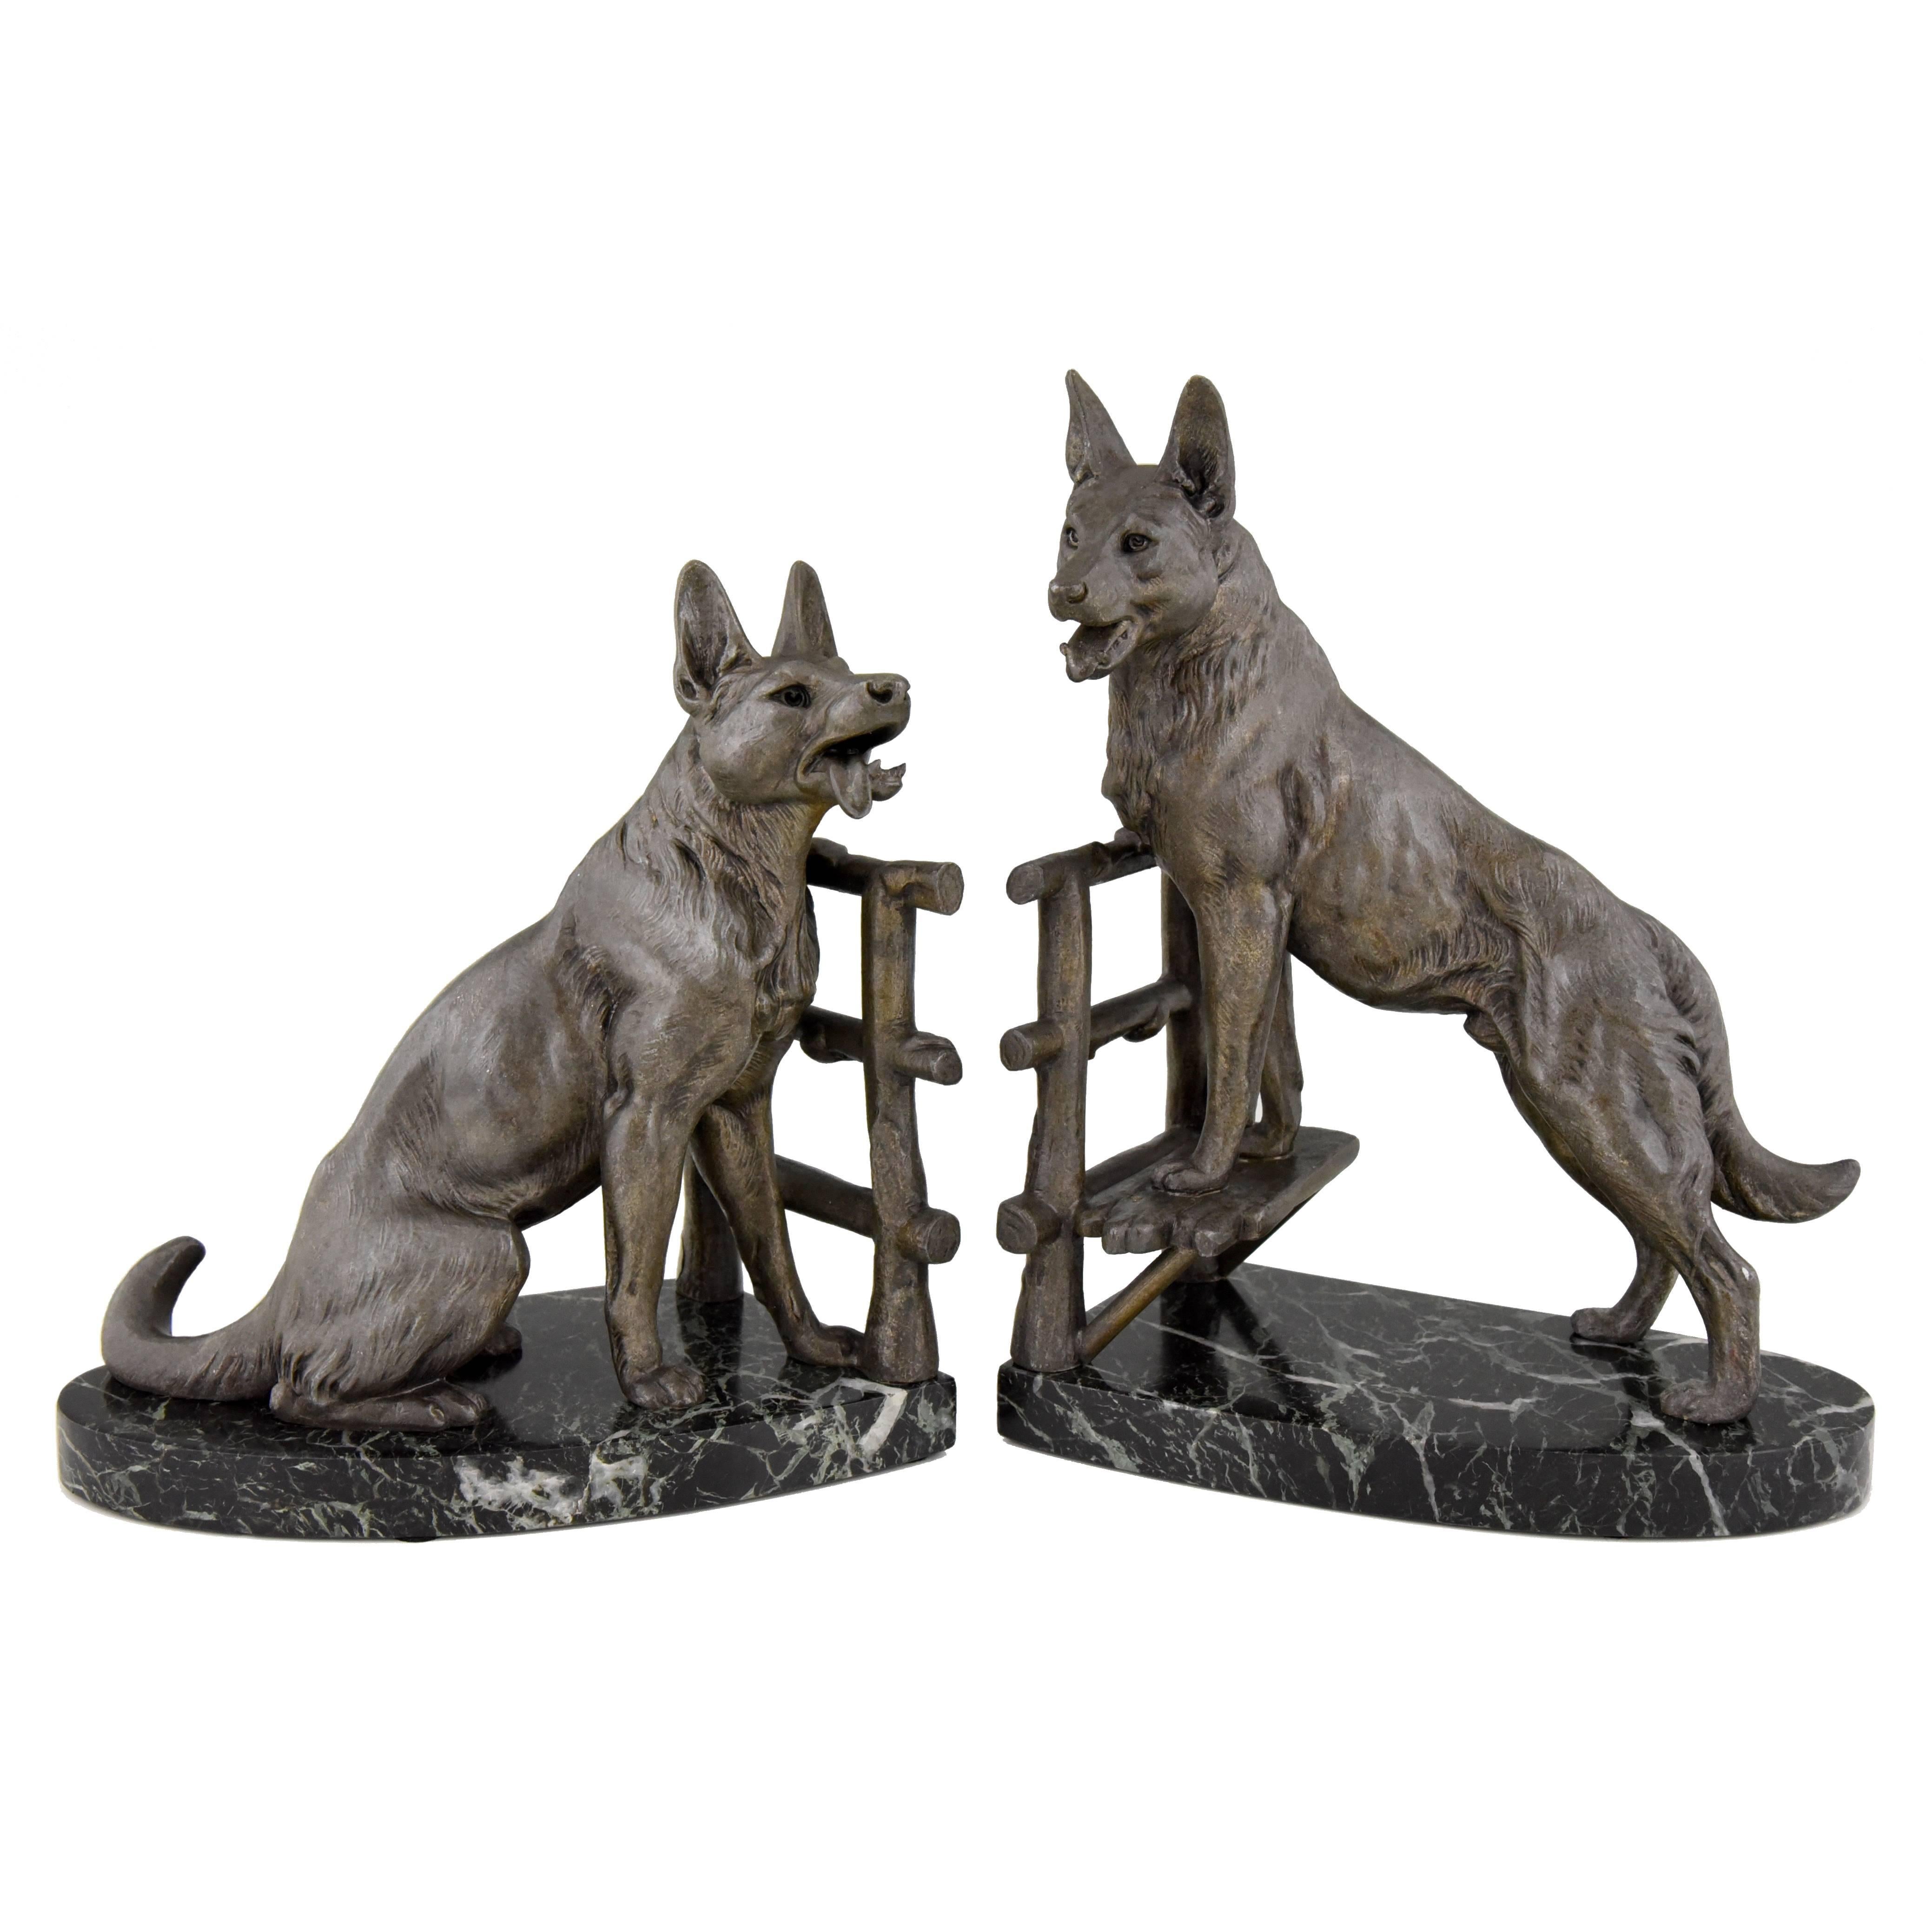 Art Deco German Shepherd Dog Bookends by Carvin, 1930 France